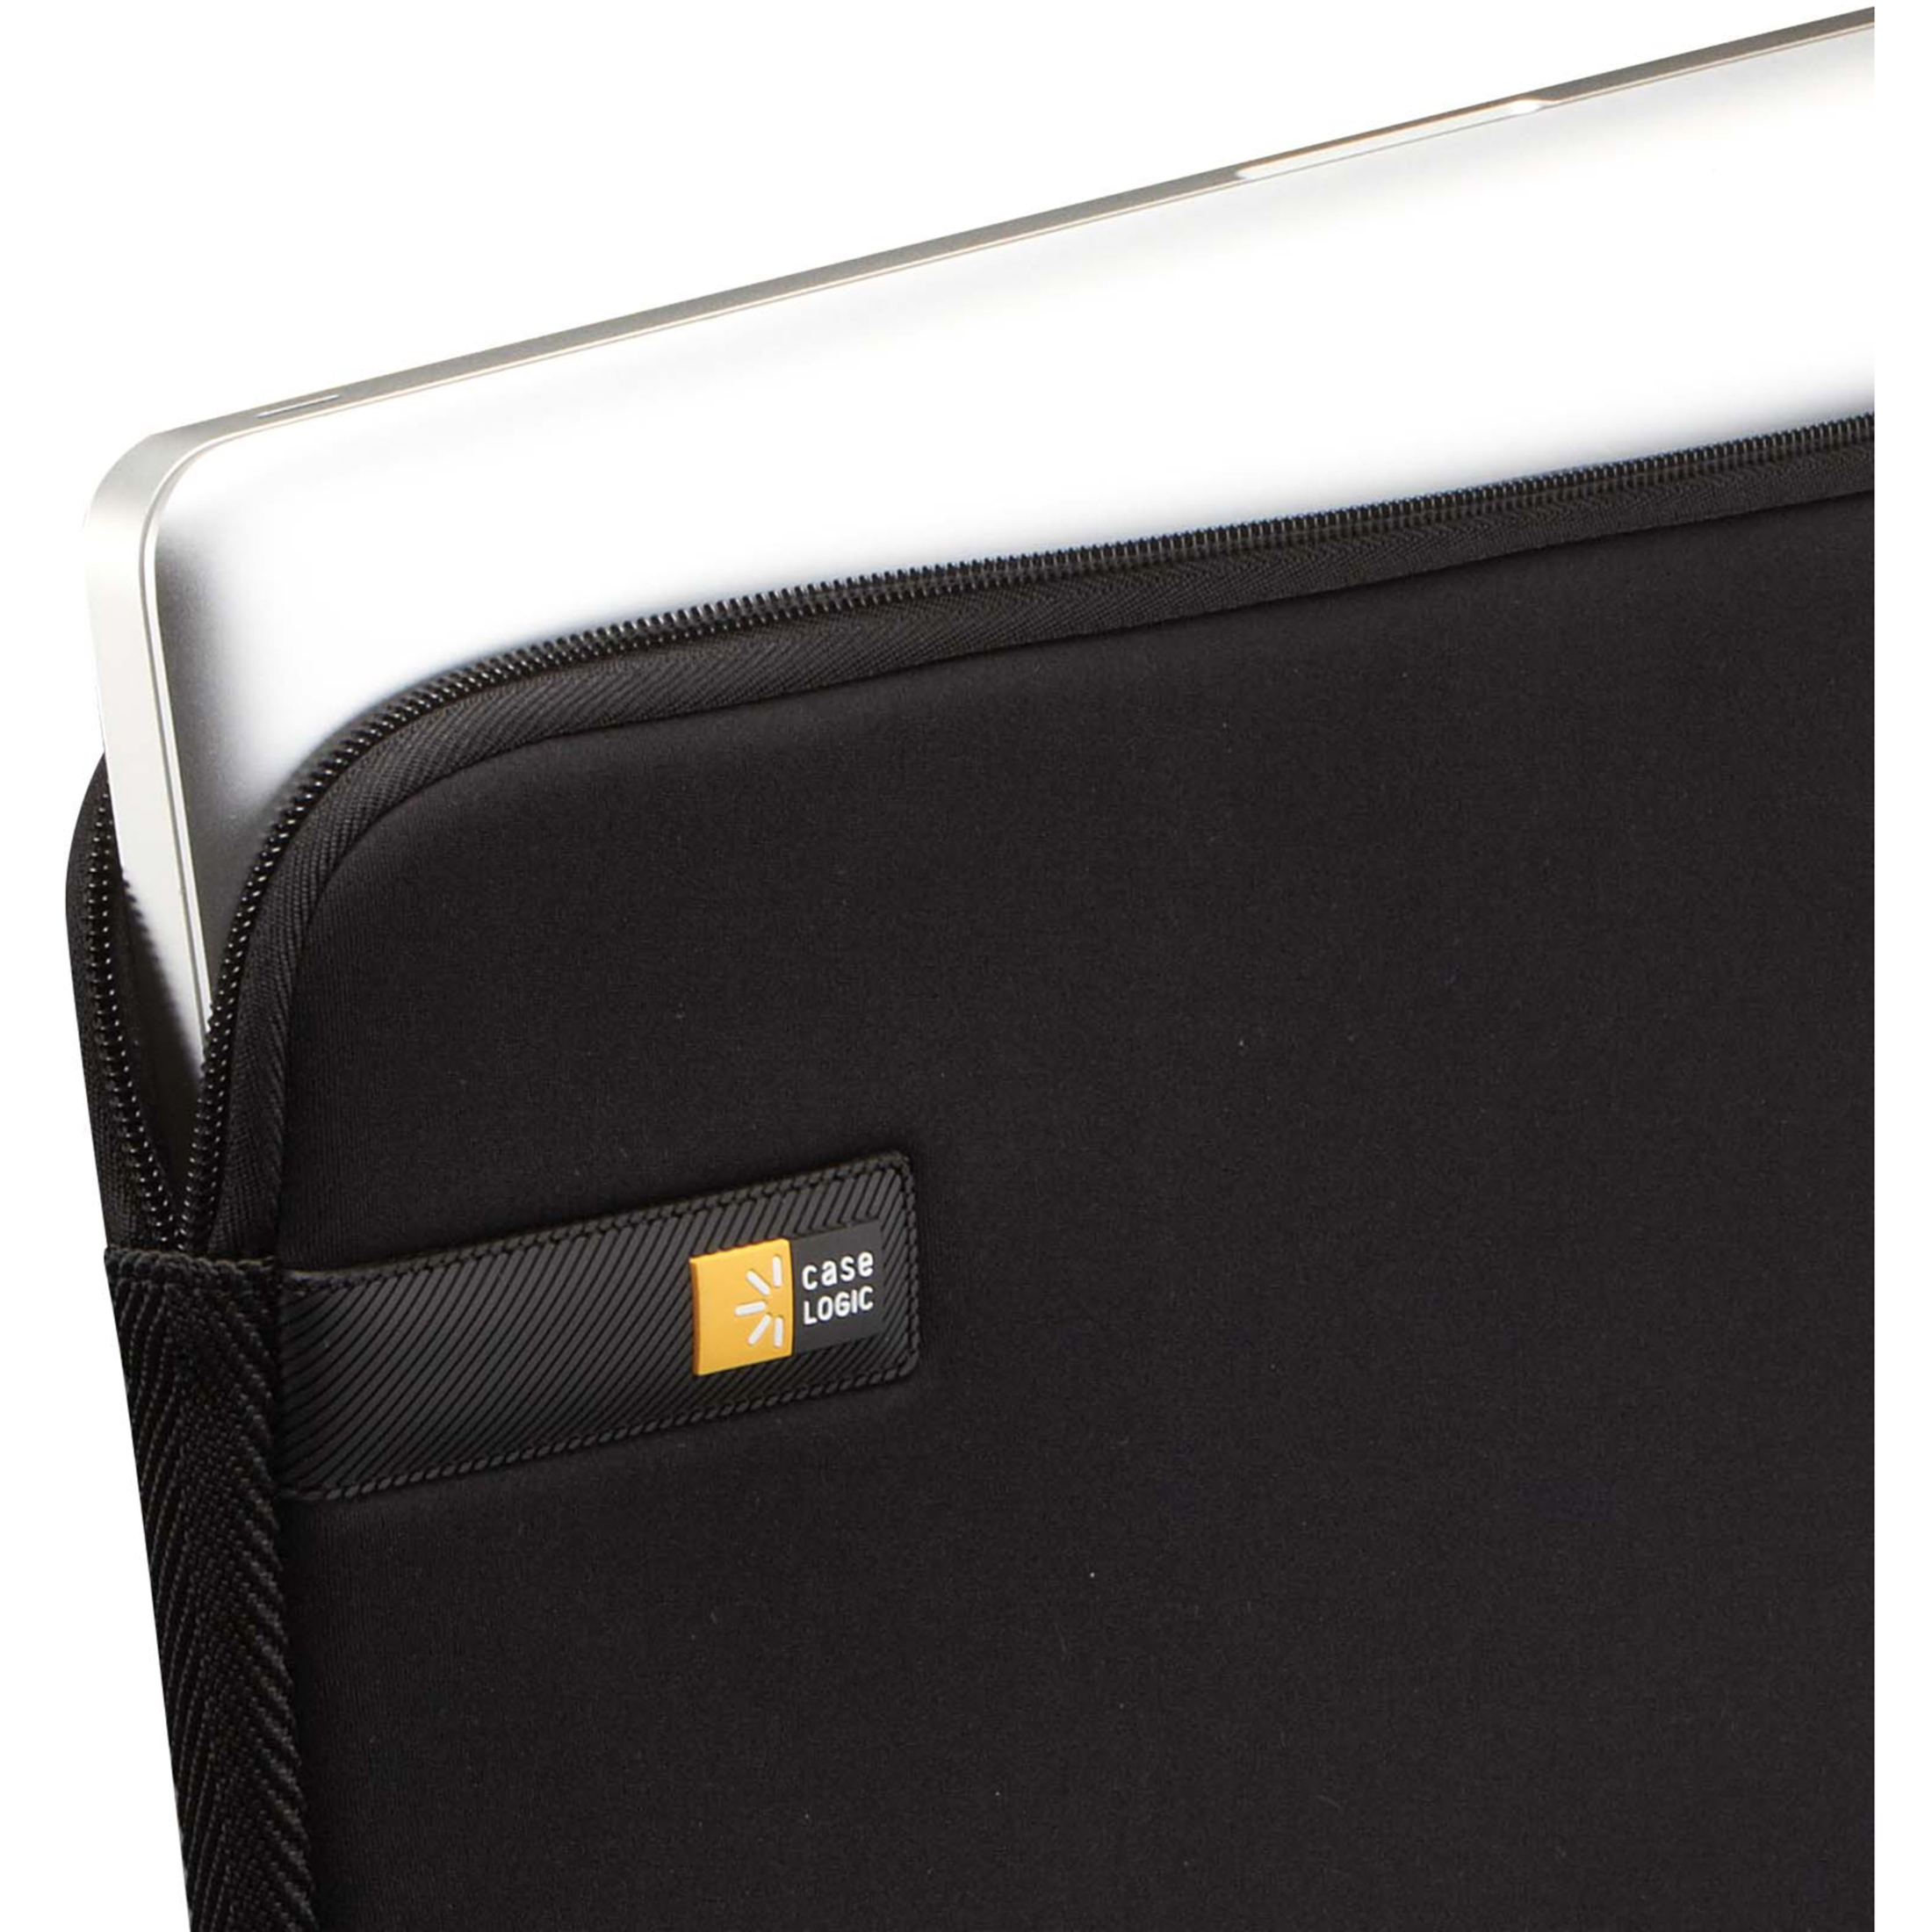 Case Logic LAPS-113 Carrying Case (Sleeve) for 13.3" MacBook Pro, Yellow - image 5 of 7